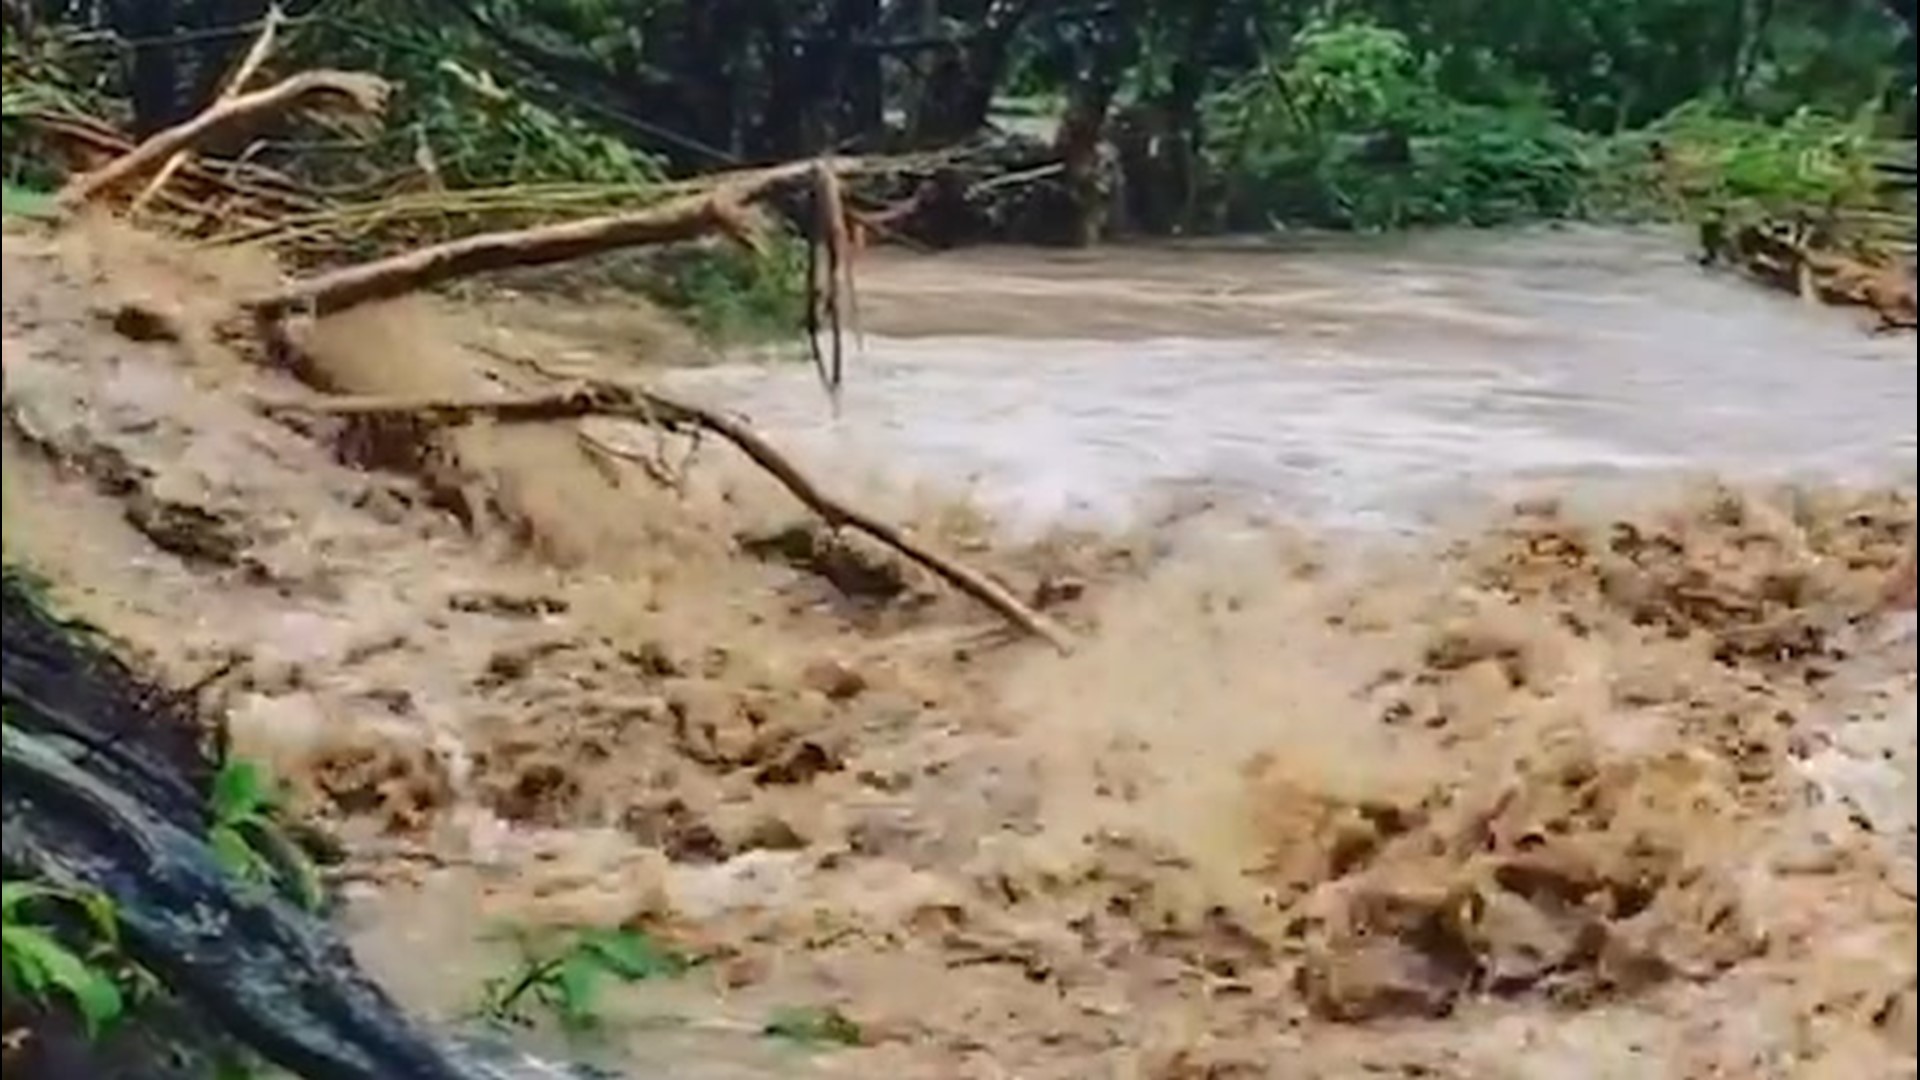 Intense rain across much of Hawaii led to flash floods and mudslides from March 8-9, hitting the island of Maui especially hard.